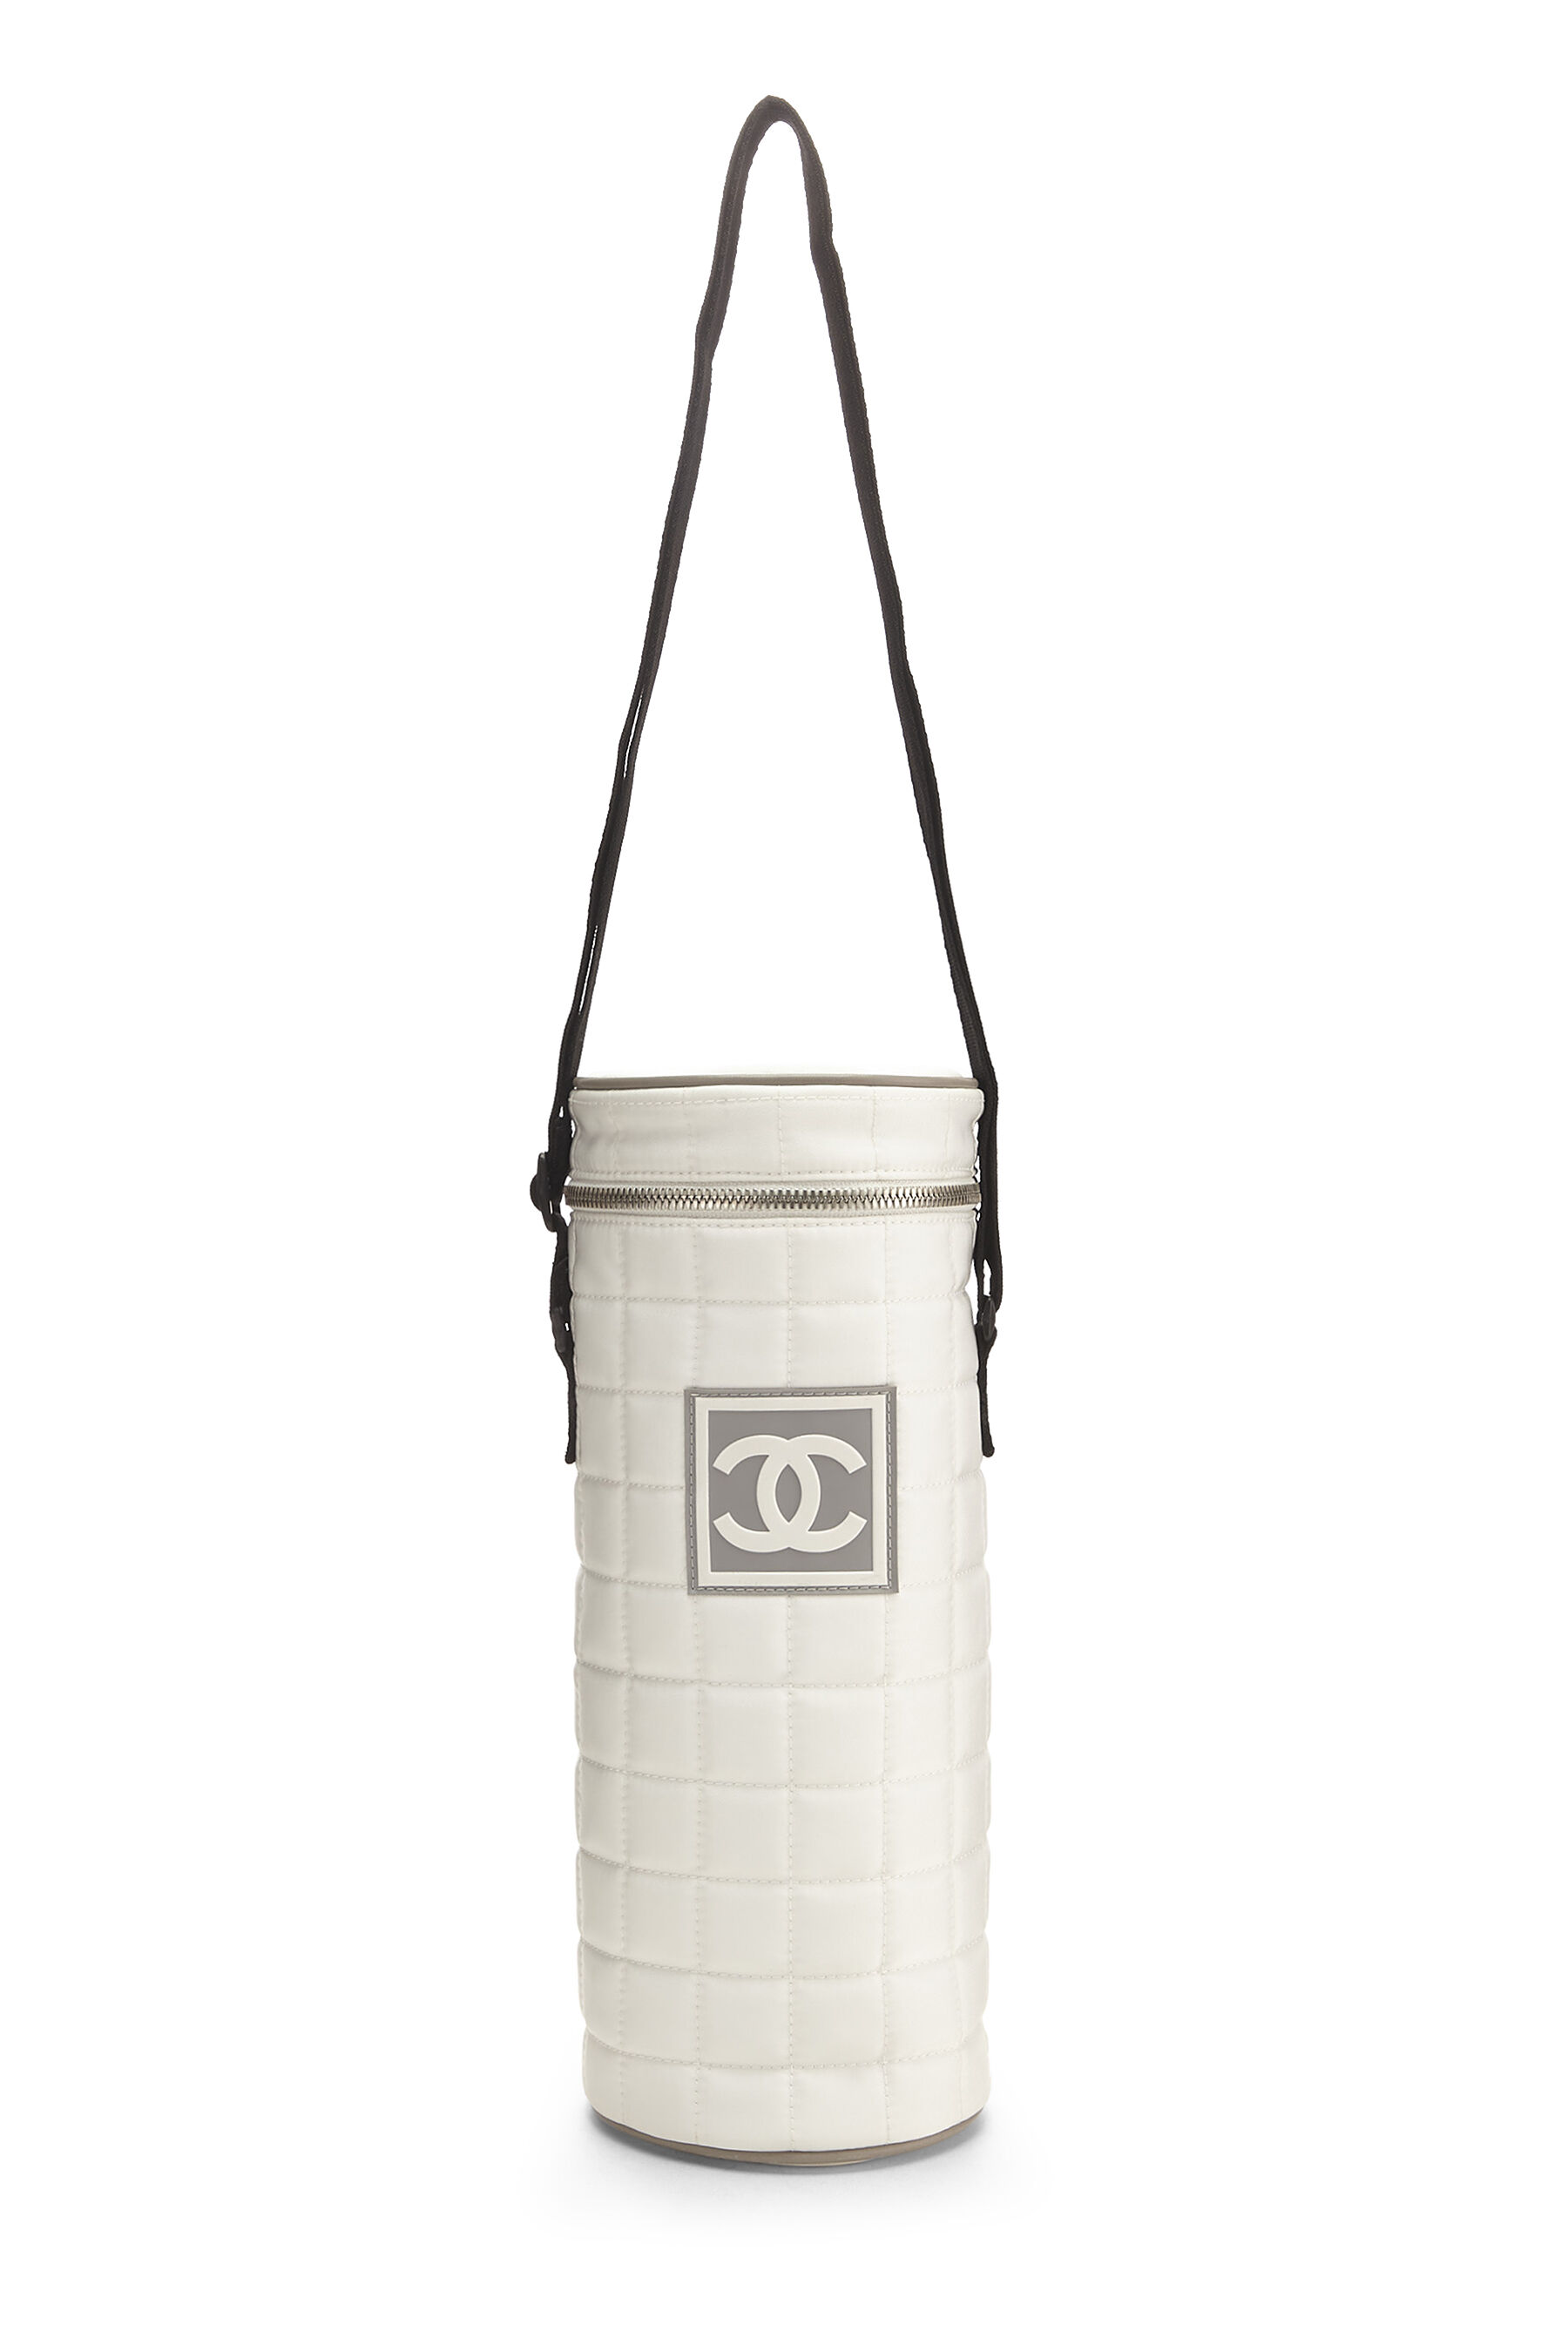 Chanel Water Bottle Holder - Black Other, Accessories - CHA06123